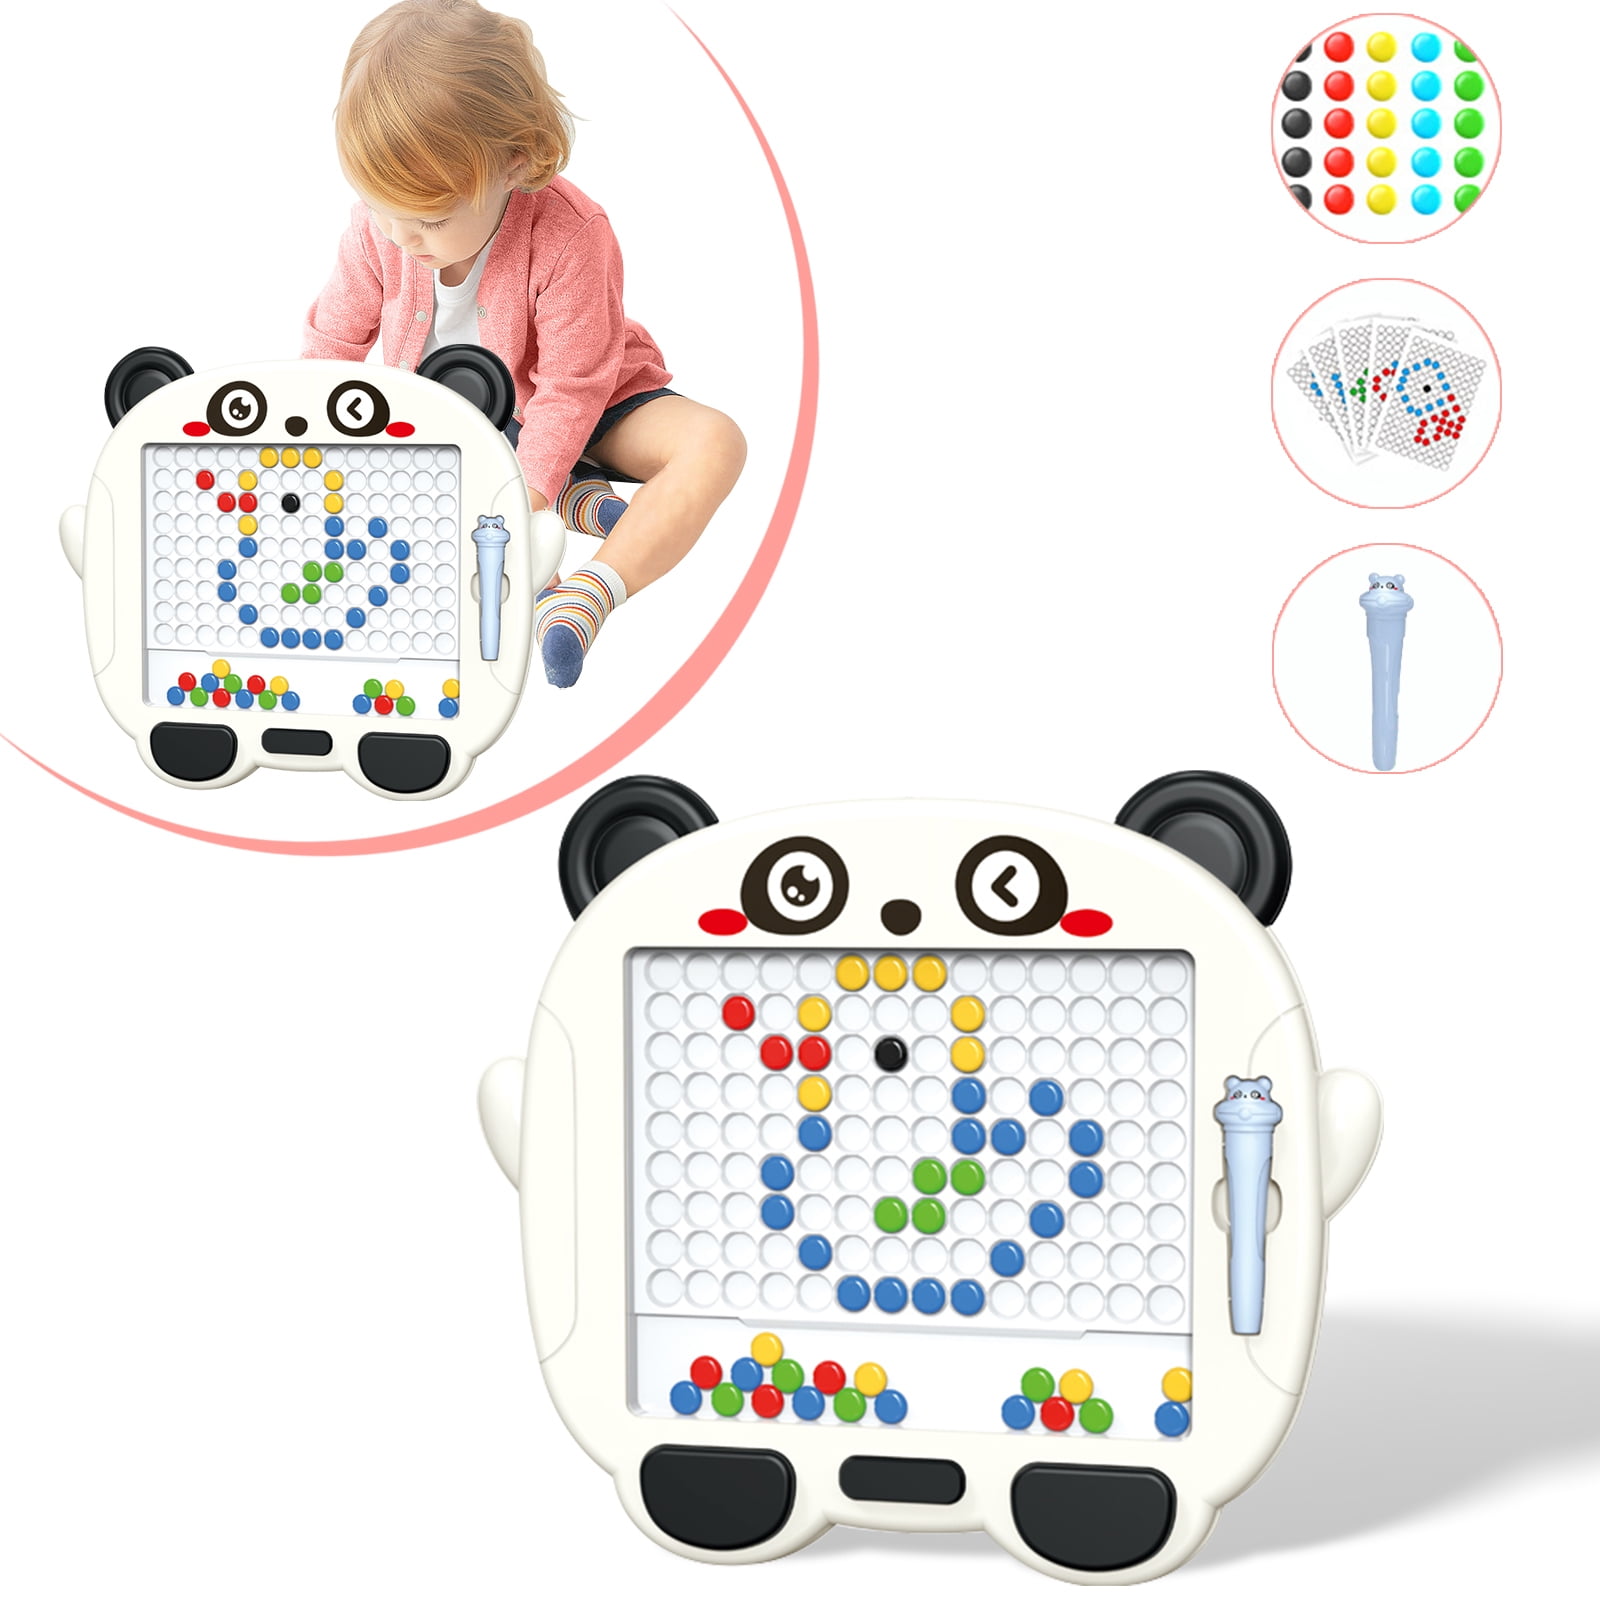  JQTOYD Magnetic Drawing Board for Toddlers &Kids Ages 4-8,  Large Magnetic Dot Art Board with Two Pens and Beads, Doodle Board  Montessori Educational Preschool Toy for 3 Years and up 